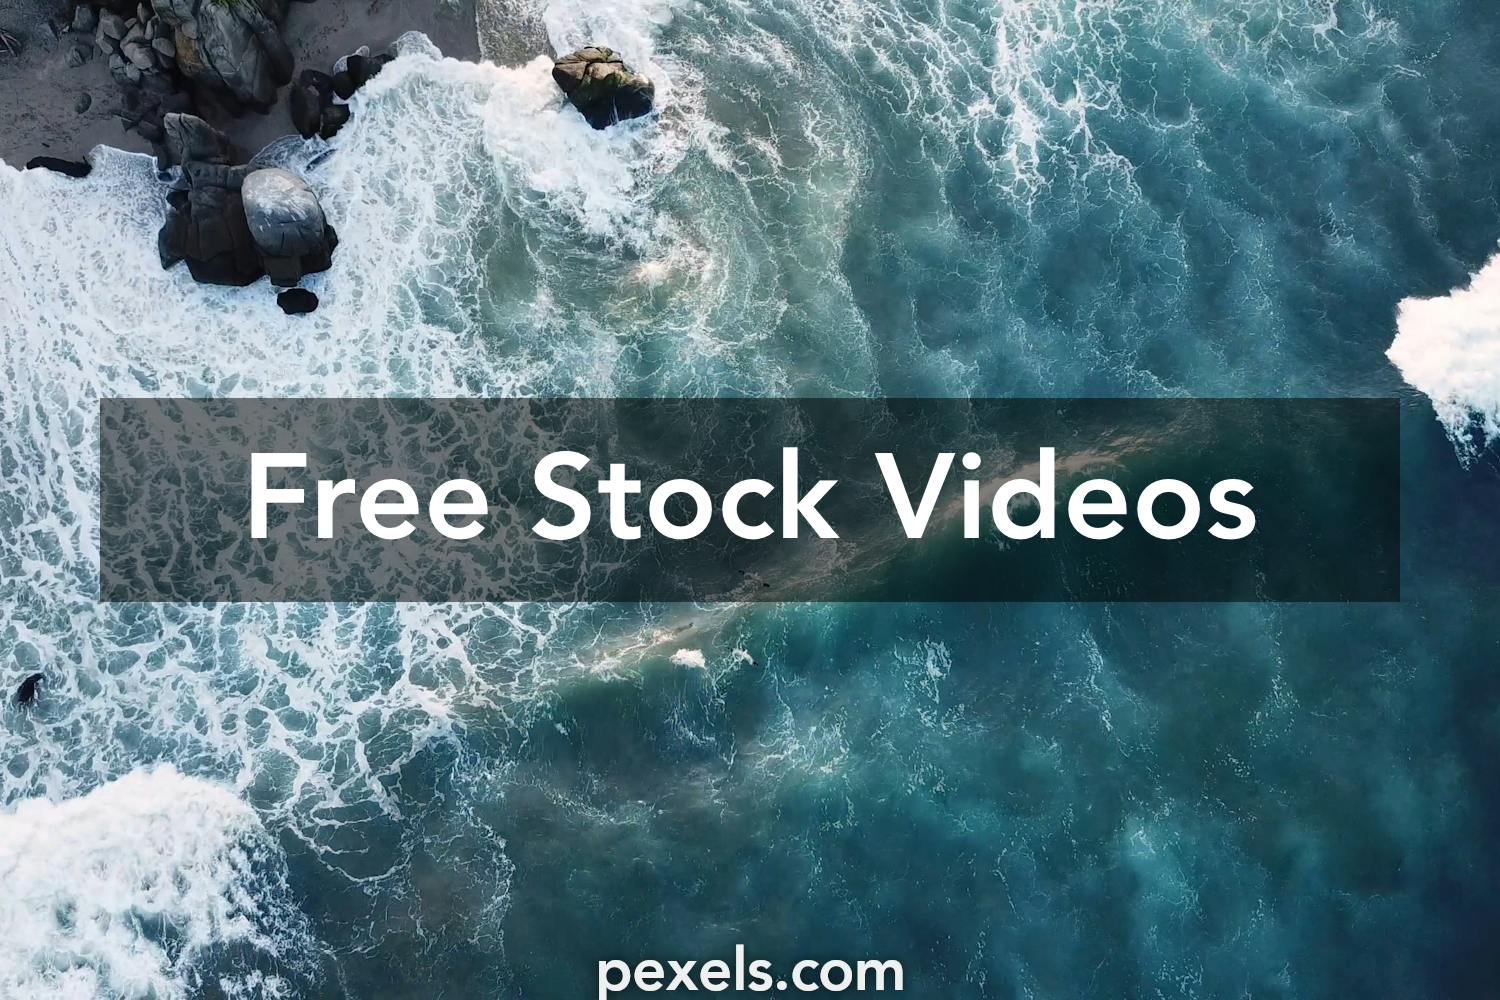 Videos, Download The BEST Free 4k Stock Video Footage & Video Clips